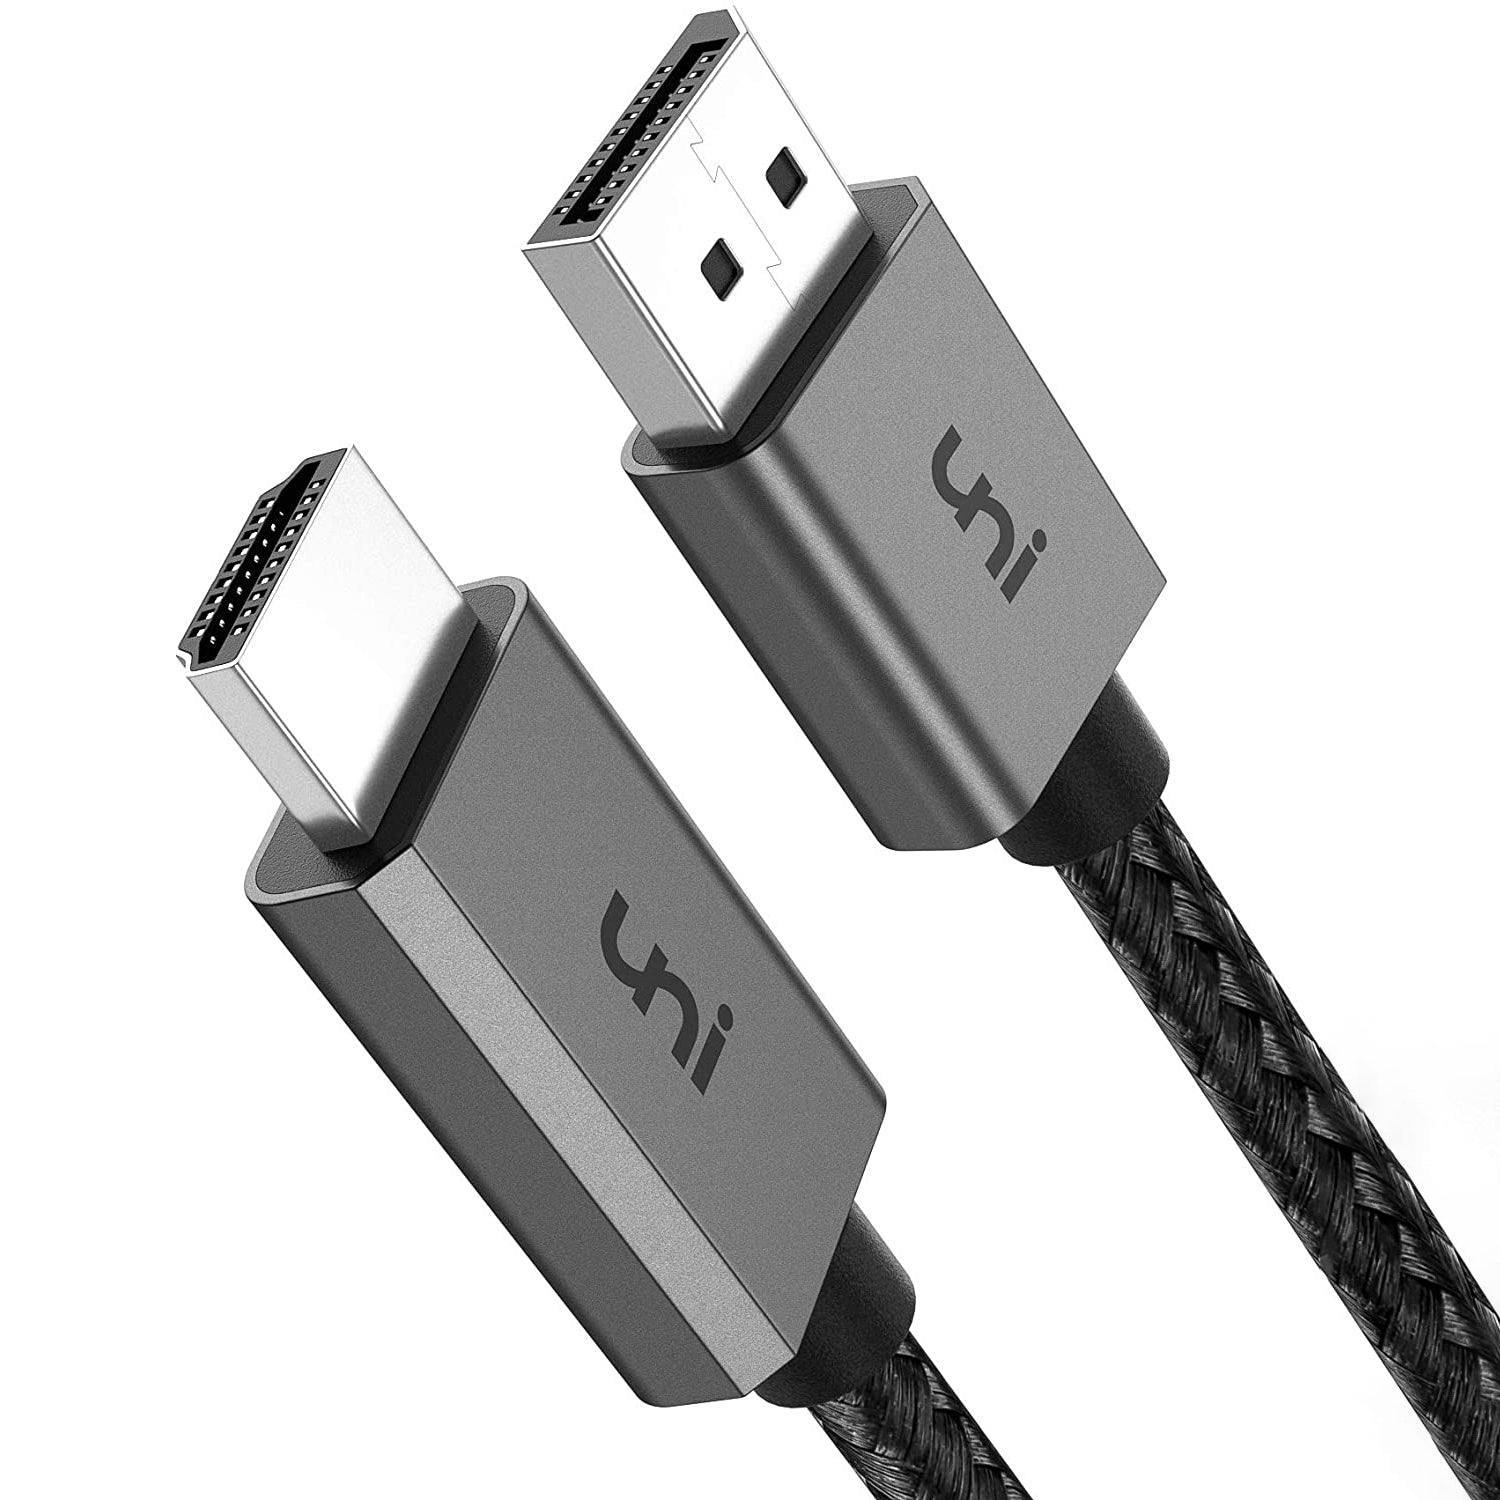 Antipoison indbildskhed varm uni® DisplayPort to HDMI Cable, Perfect 4K Aluminum Gaming Cable